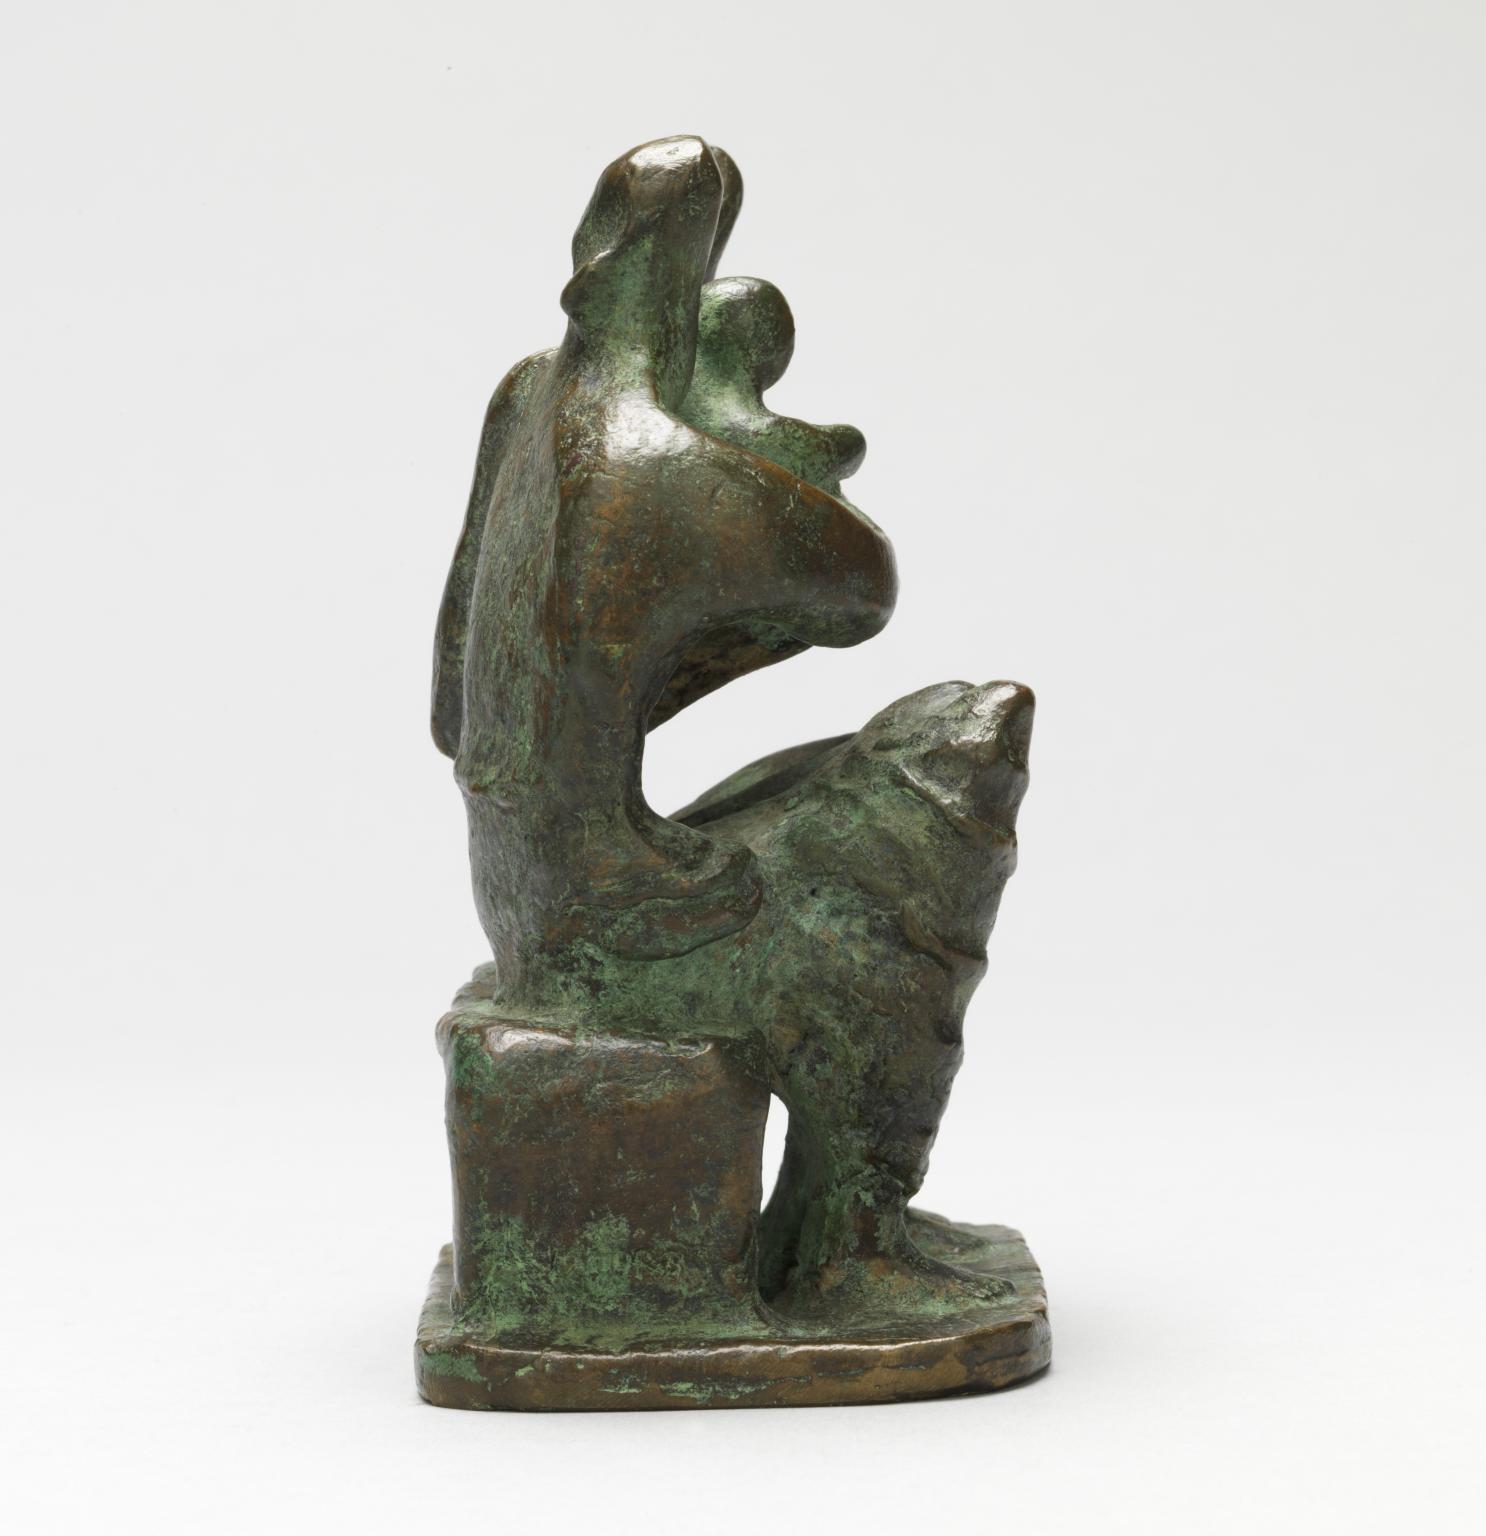 Henry Moore OM, CH, 'Maquette for Family Group' 1945 (Henry Moore ...